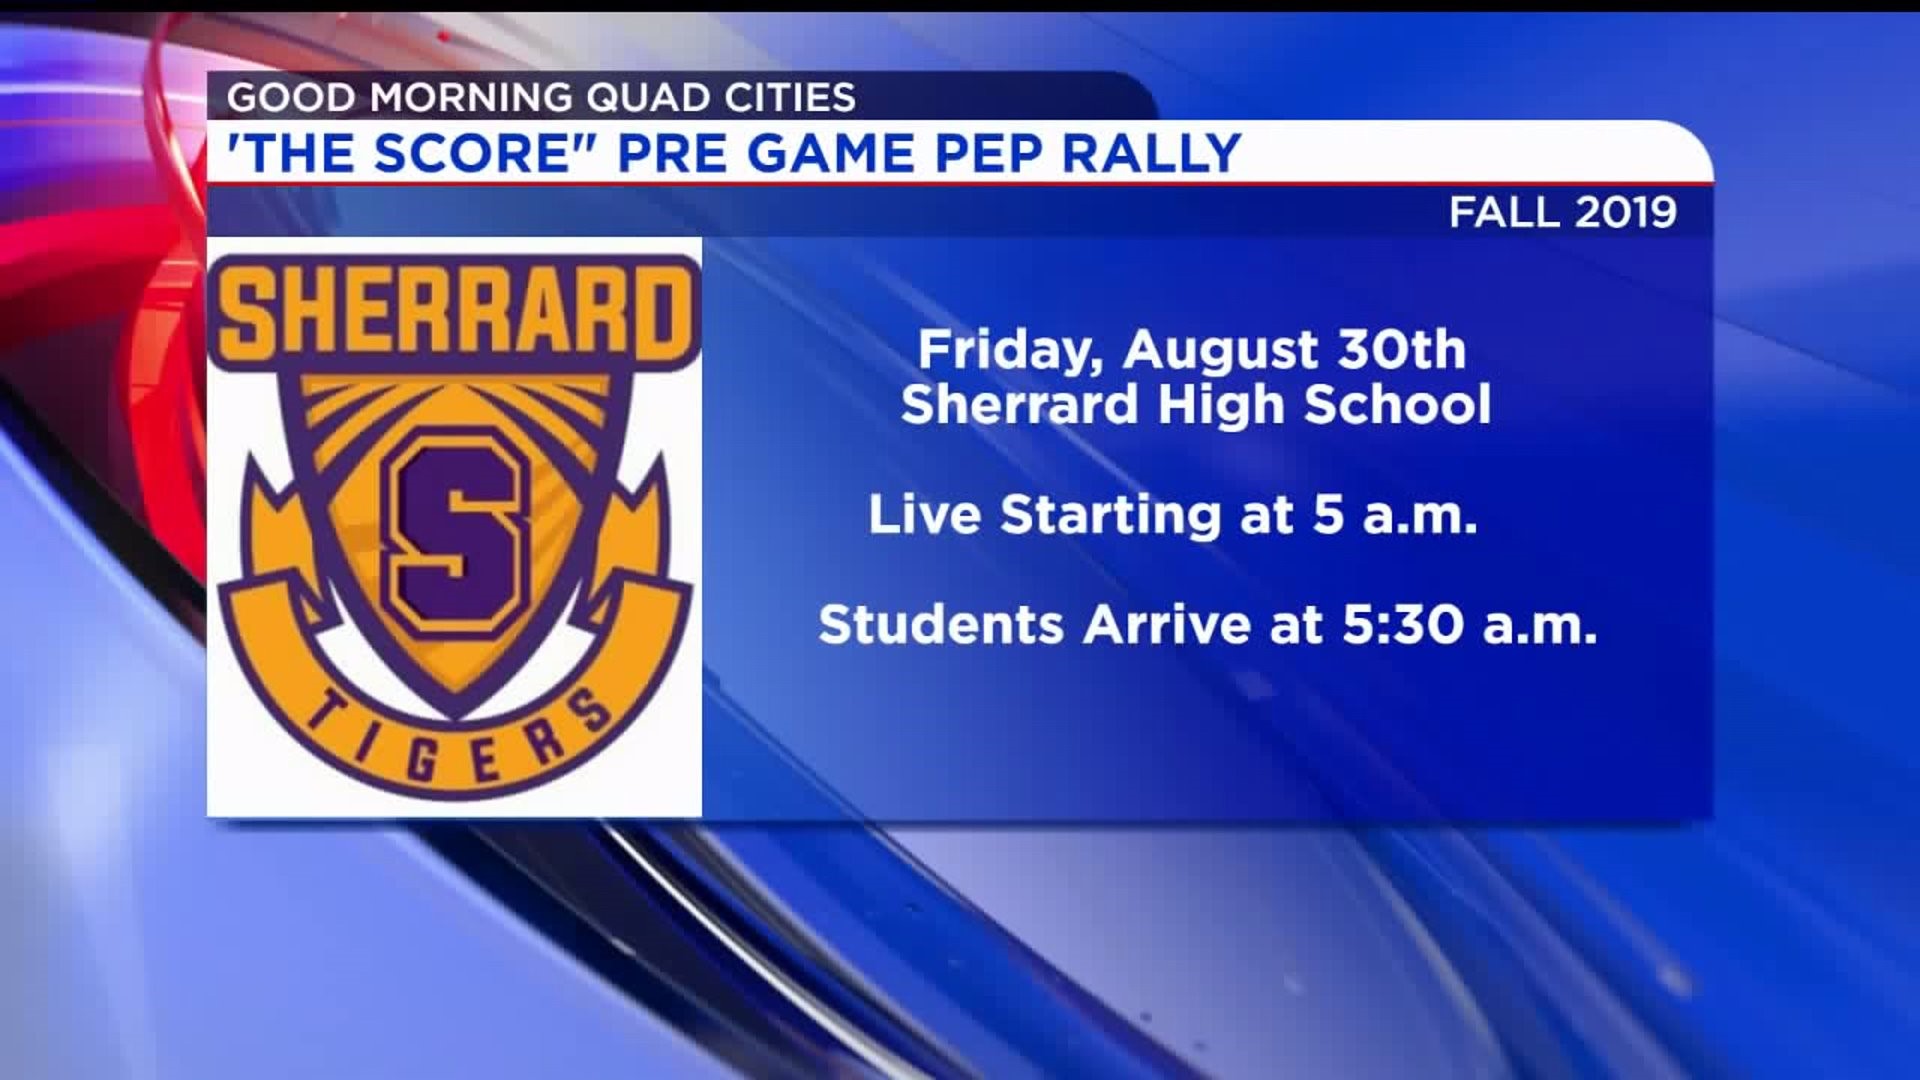 Week 1 of The Score Pre-Game Pep Rally takes us to...Sherrard!